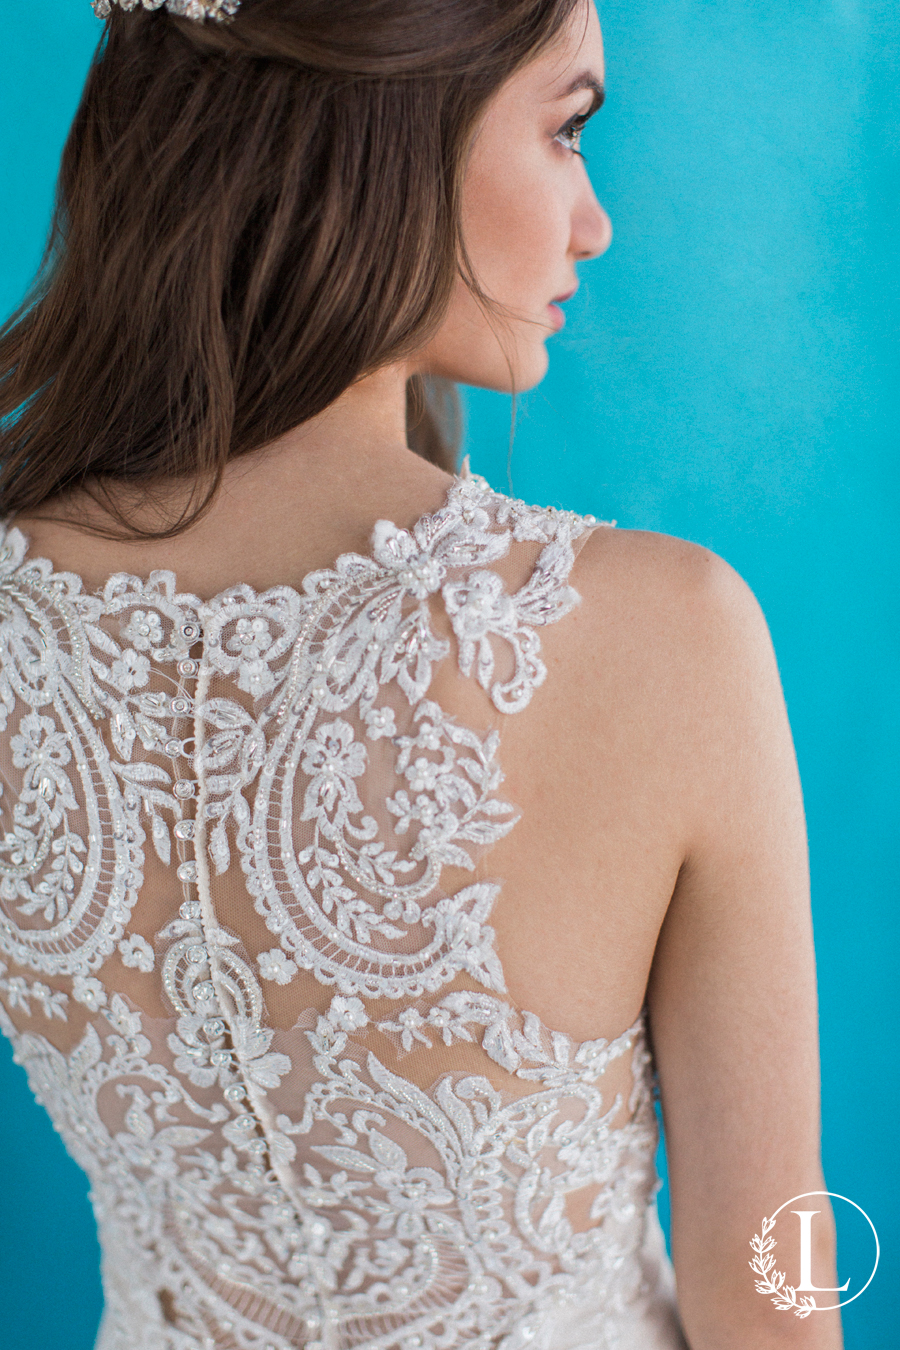 back portrait of bridal gown, rae by sottero and midgley, fine art wedding photographer, film wedding photographer, missouri bridal portrait, missouri wedding photographer, sottero and midgley, blue wall and white wedding dress, couture wedding portrait